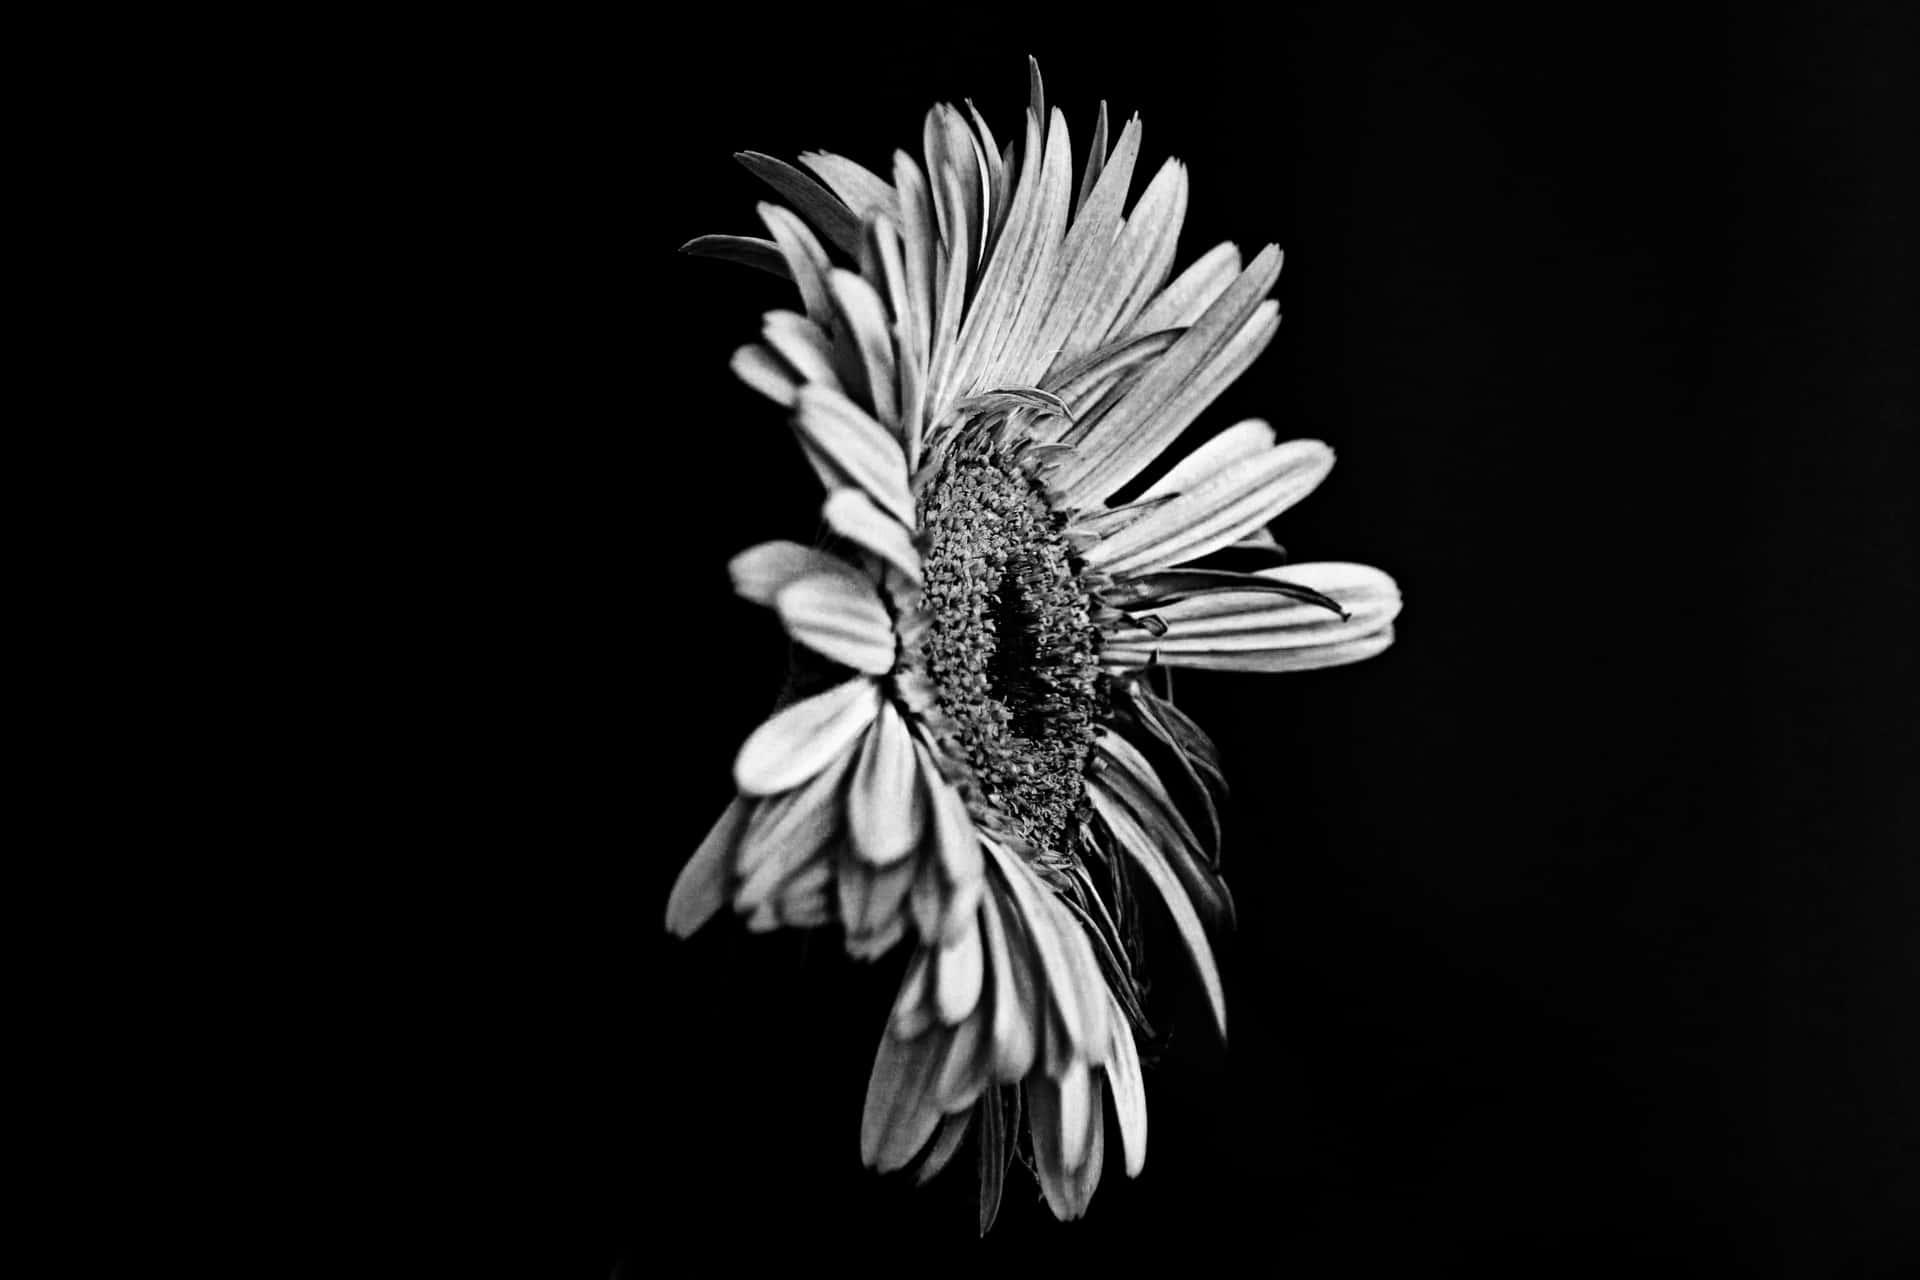 Beautiful black and white flower against a dark background